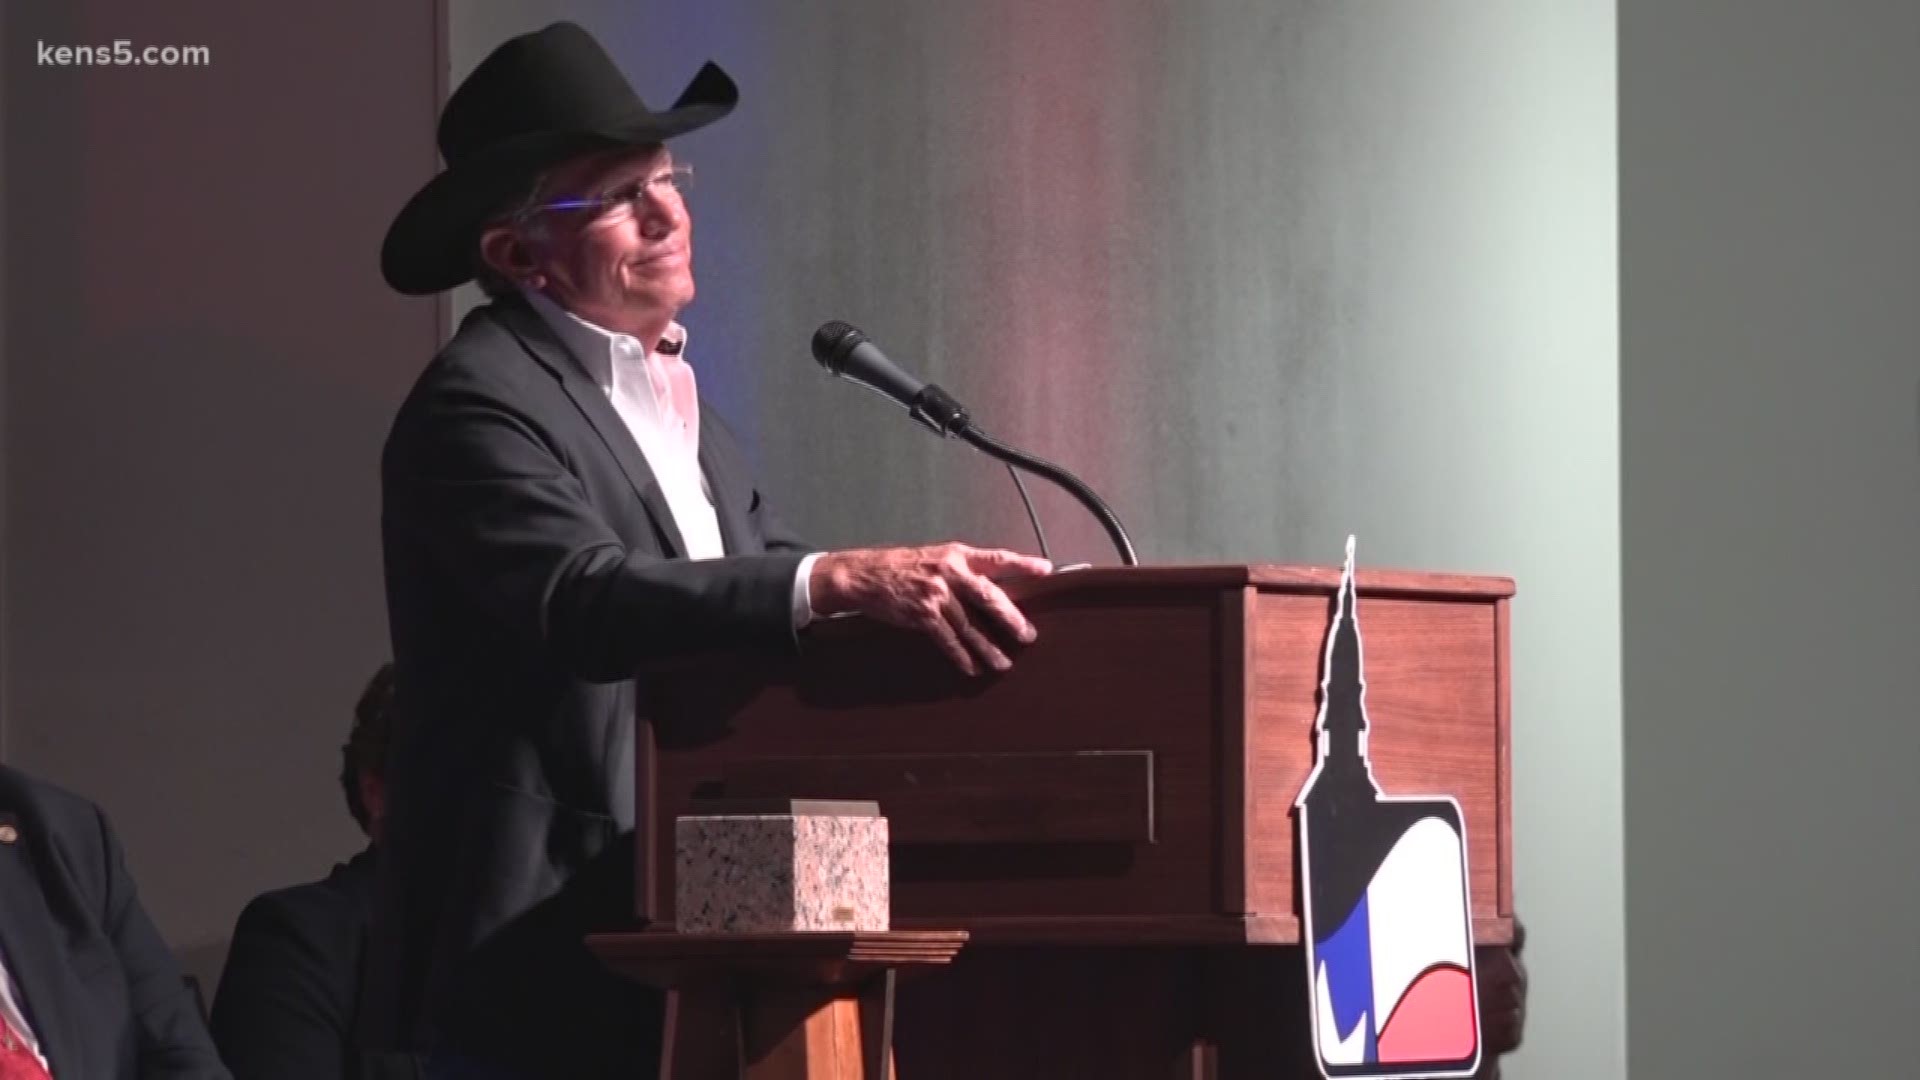 George Strait was recognized in New Braunfels Friday as the Texan of the Year after helping raise millions for hurricane victims.